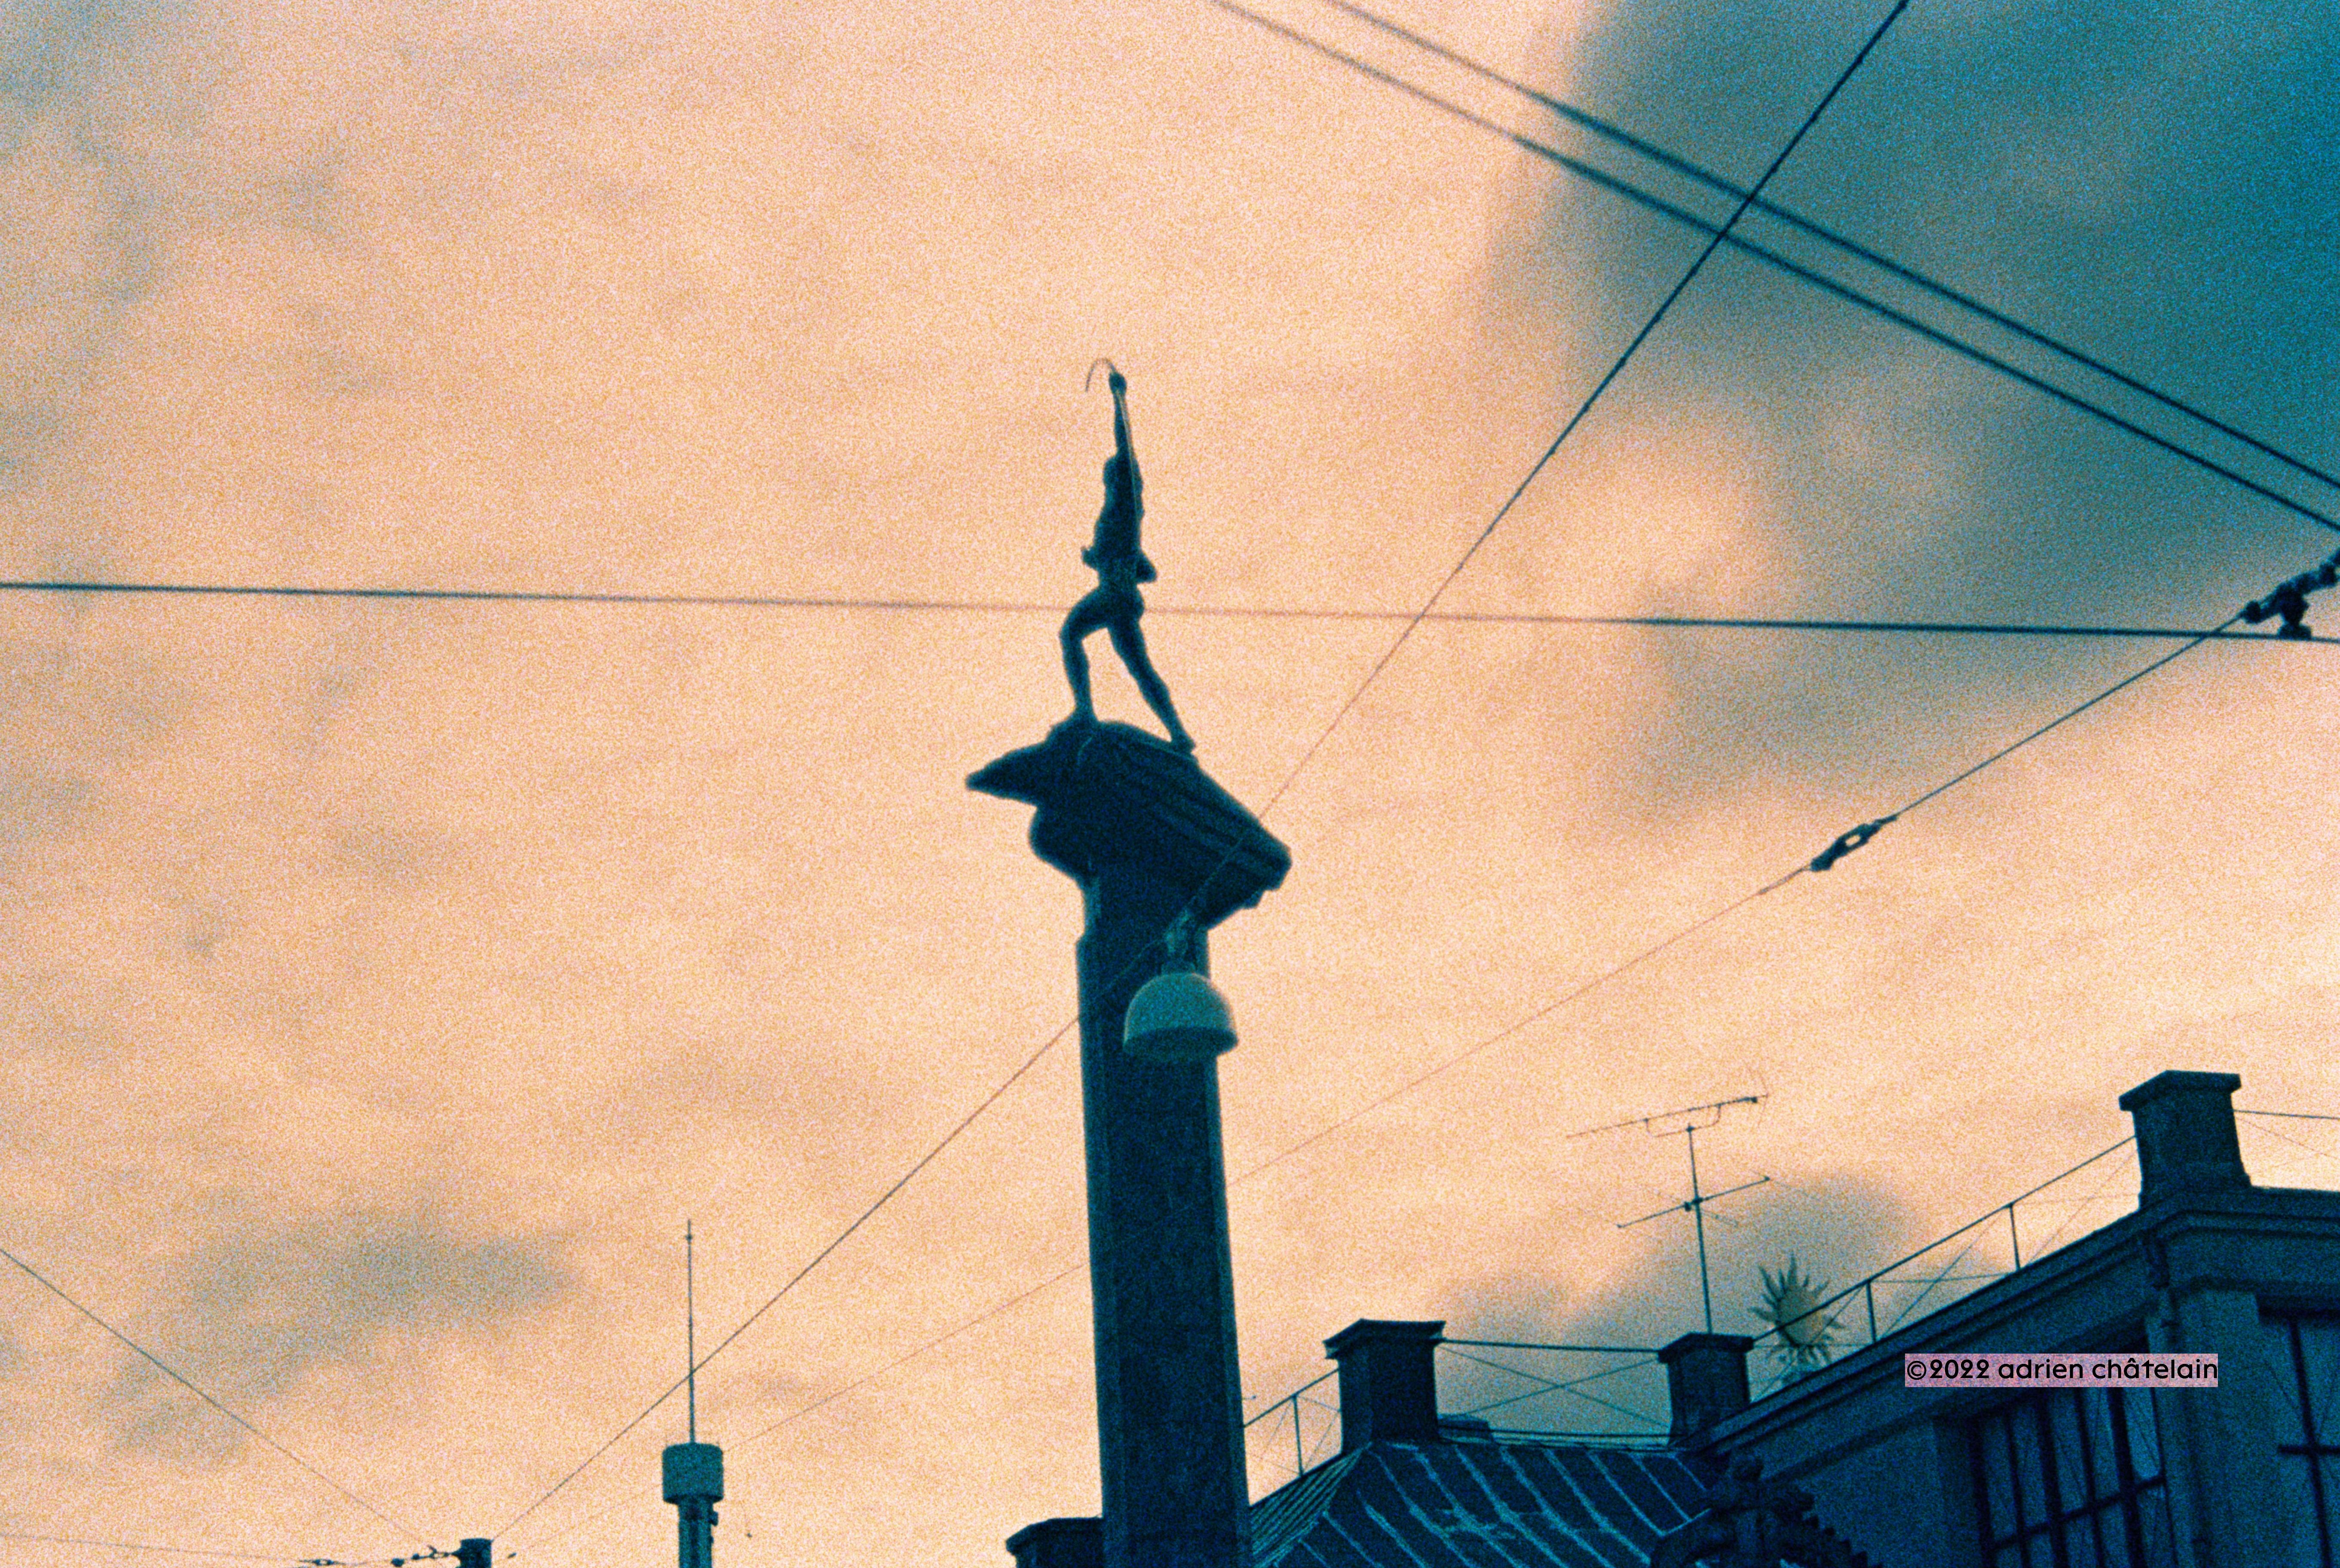 Cross Processed analog photo of Carl Milles' The Archer framed by overhead tram power lines, Stockholm